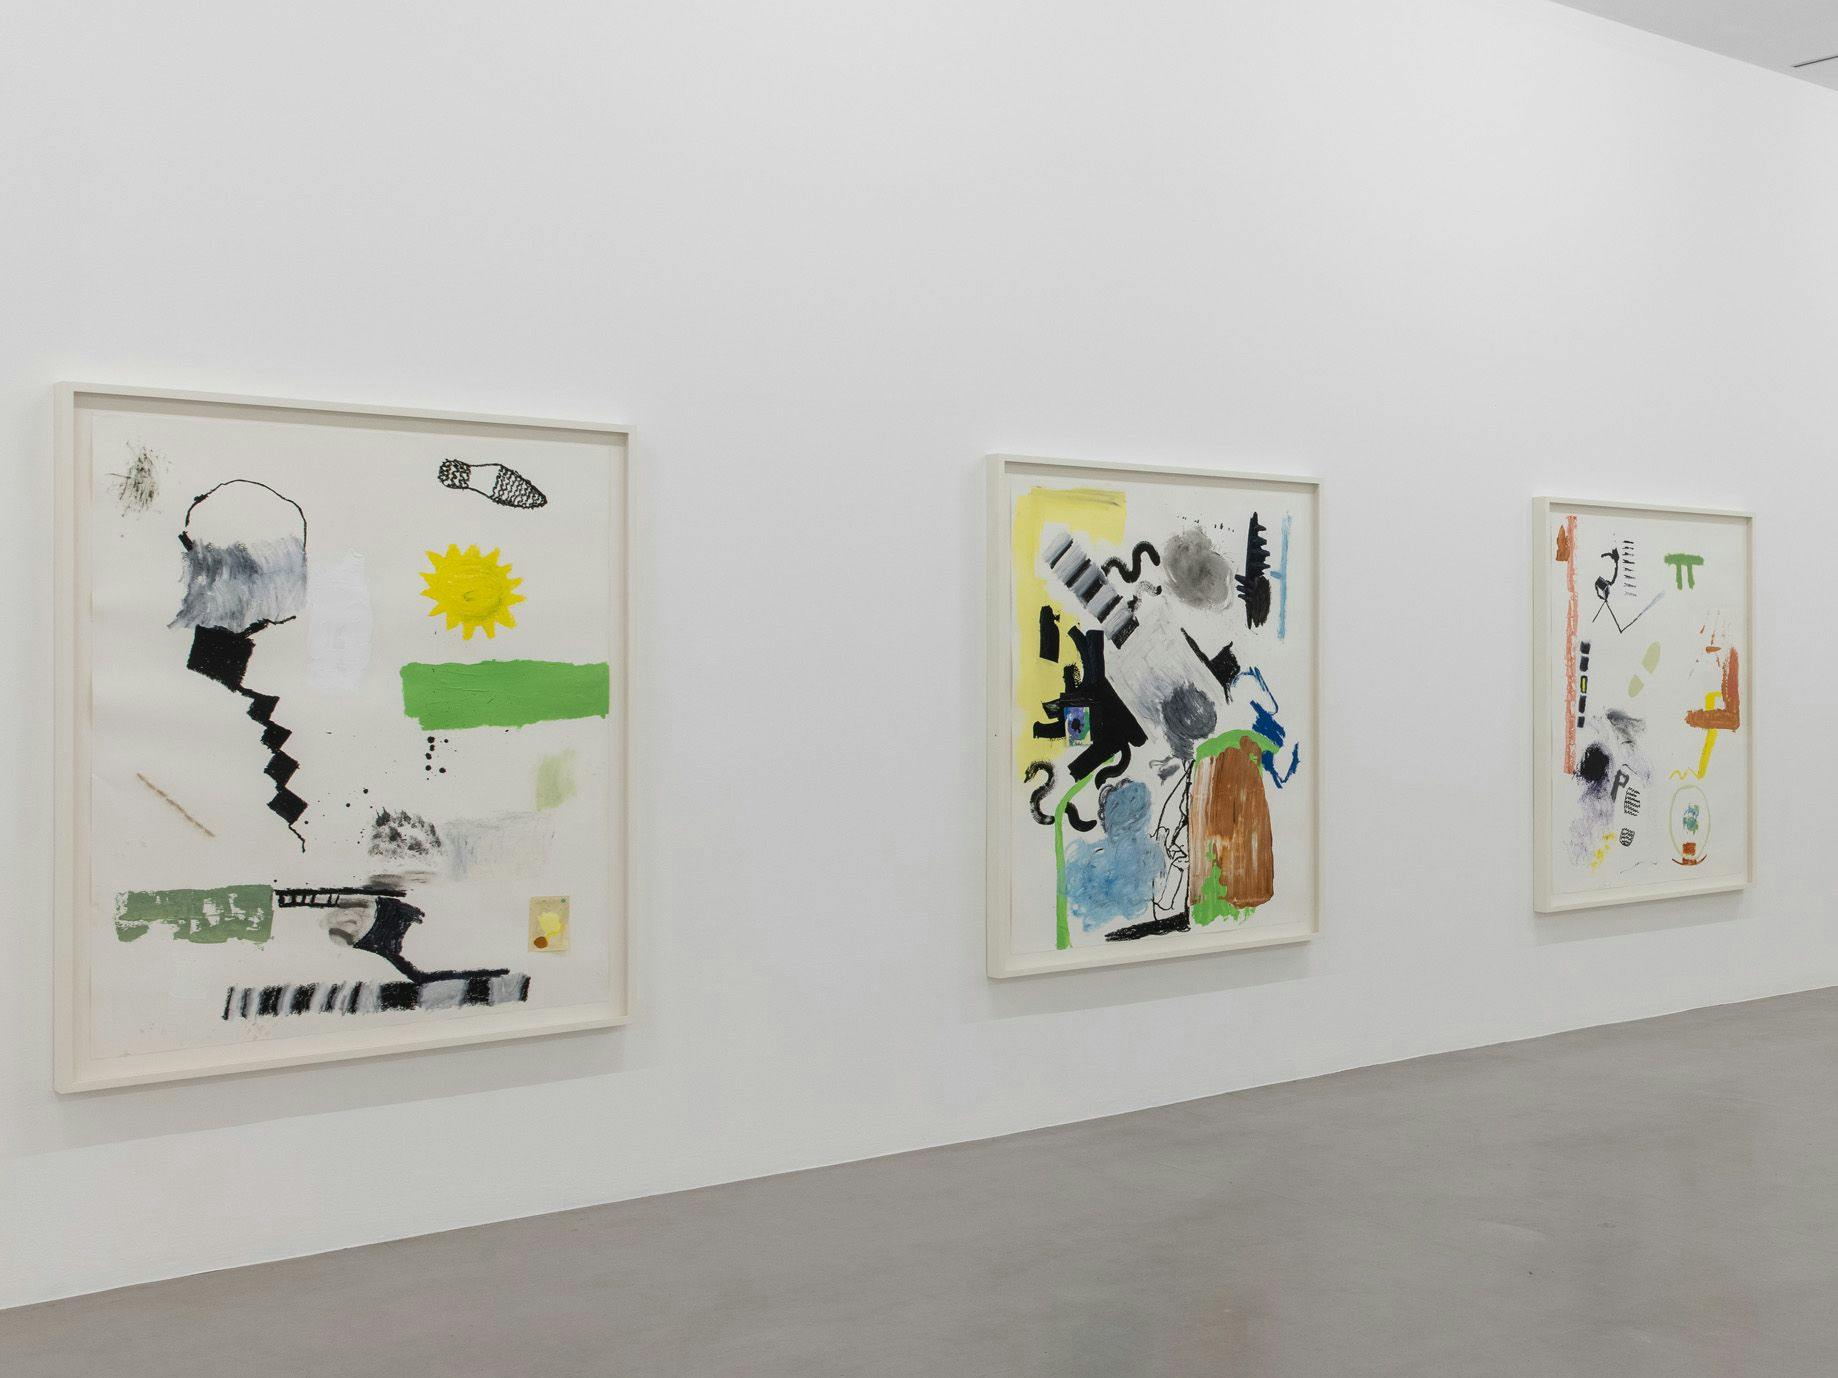 An installation view of the exhibition, Walter Price: Pearl Lines, at Camden Art Centre in London, dated 2021.